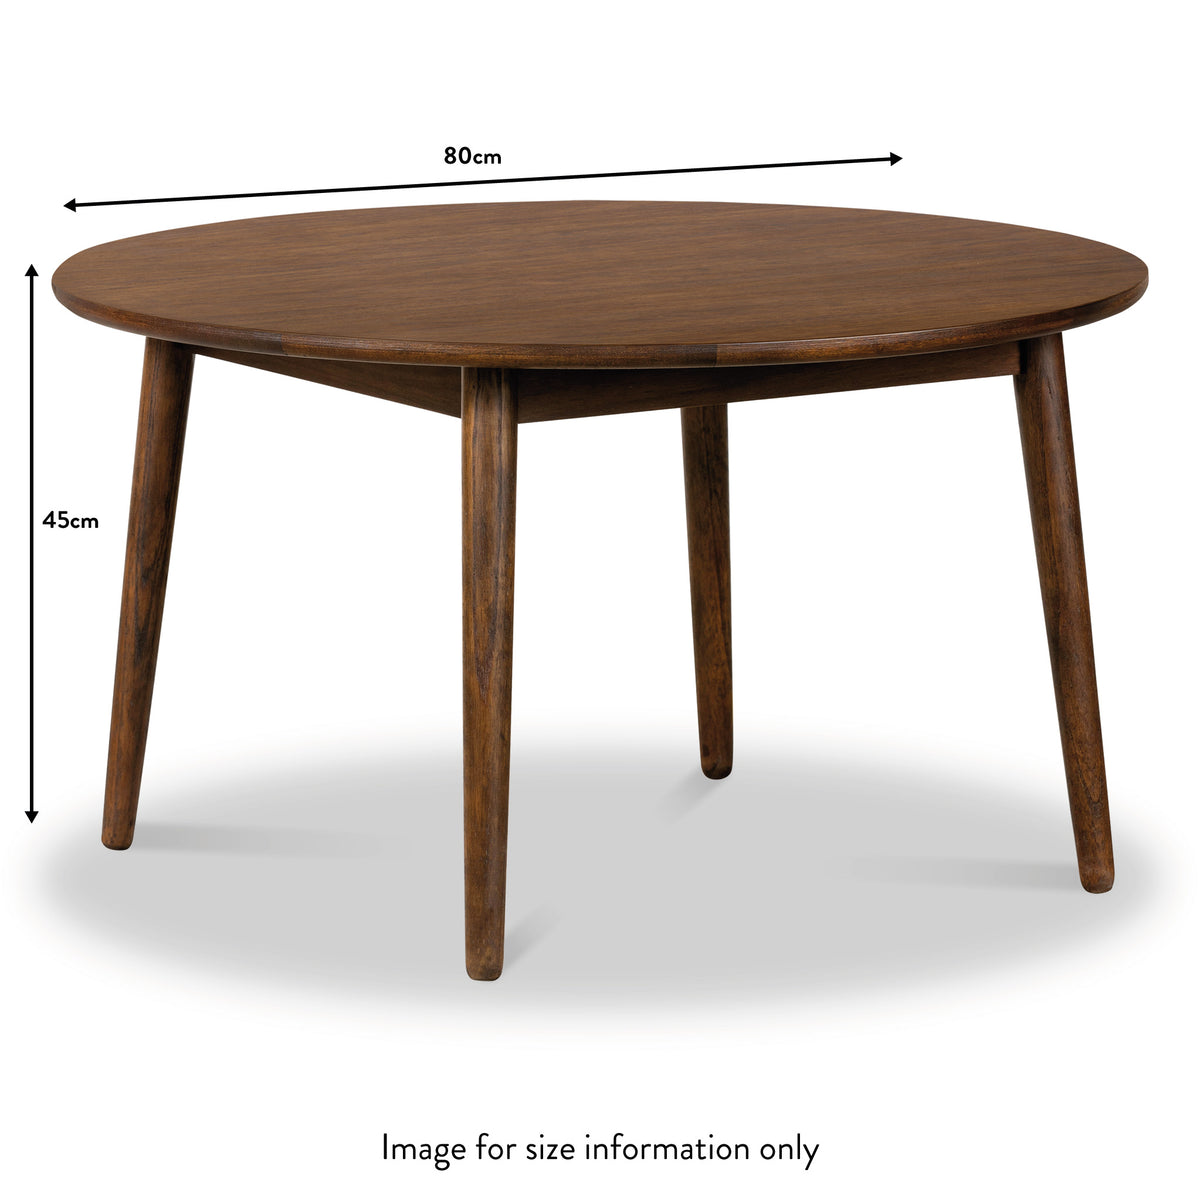 Oskar Compact Round Coffee Table dimensions